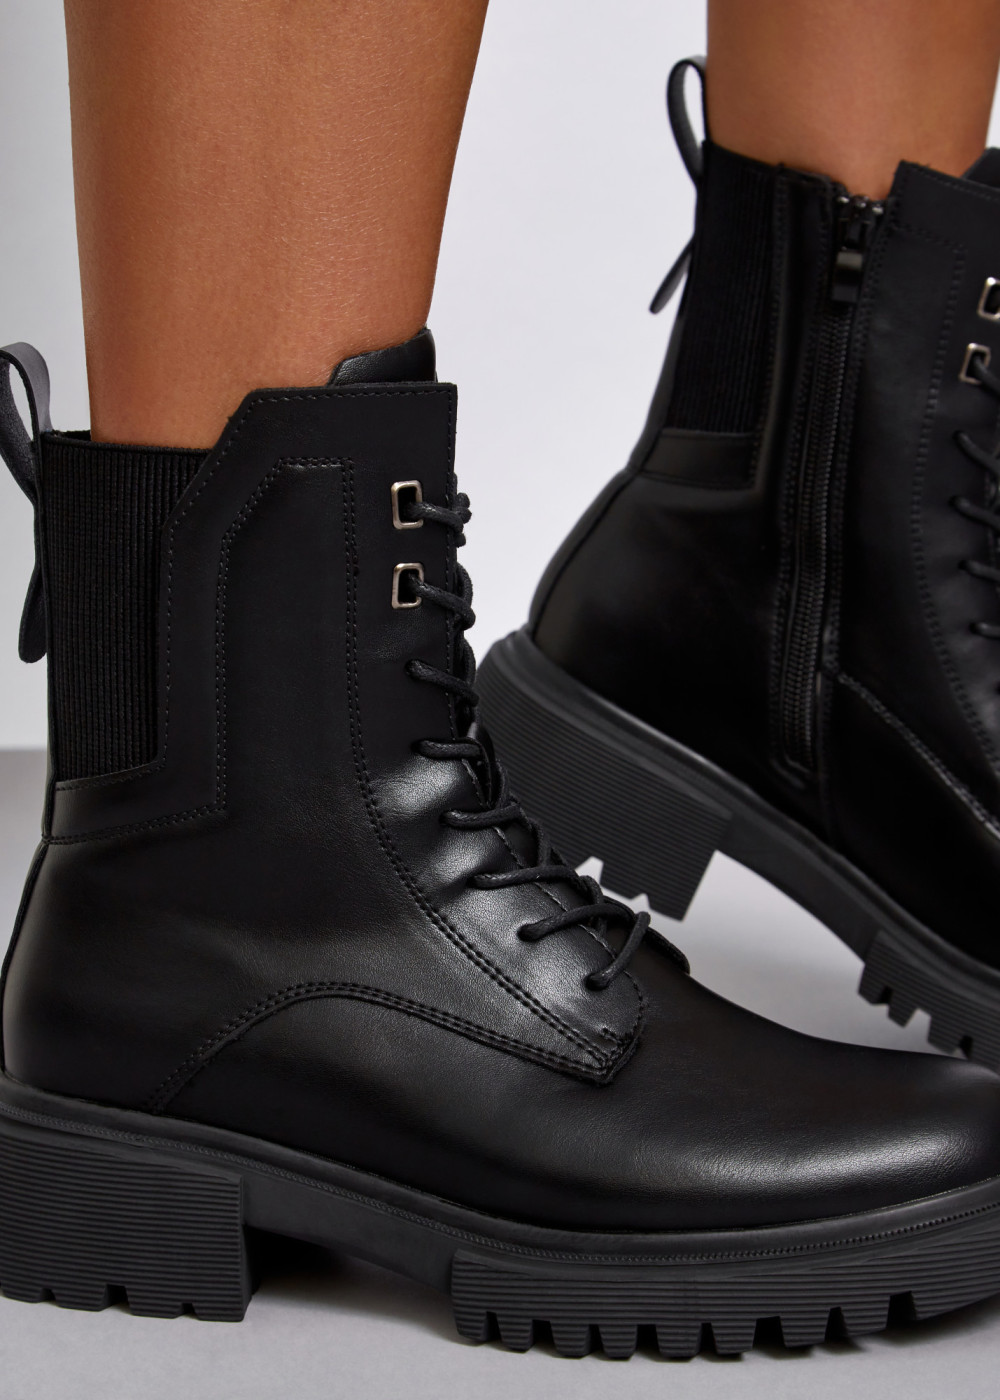 Black lace up army boots 2